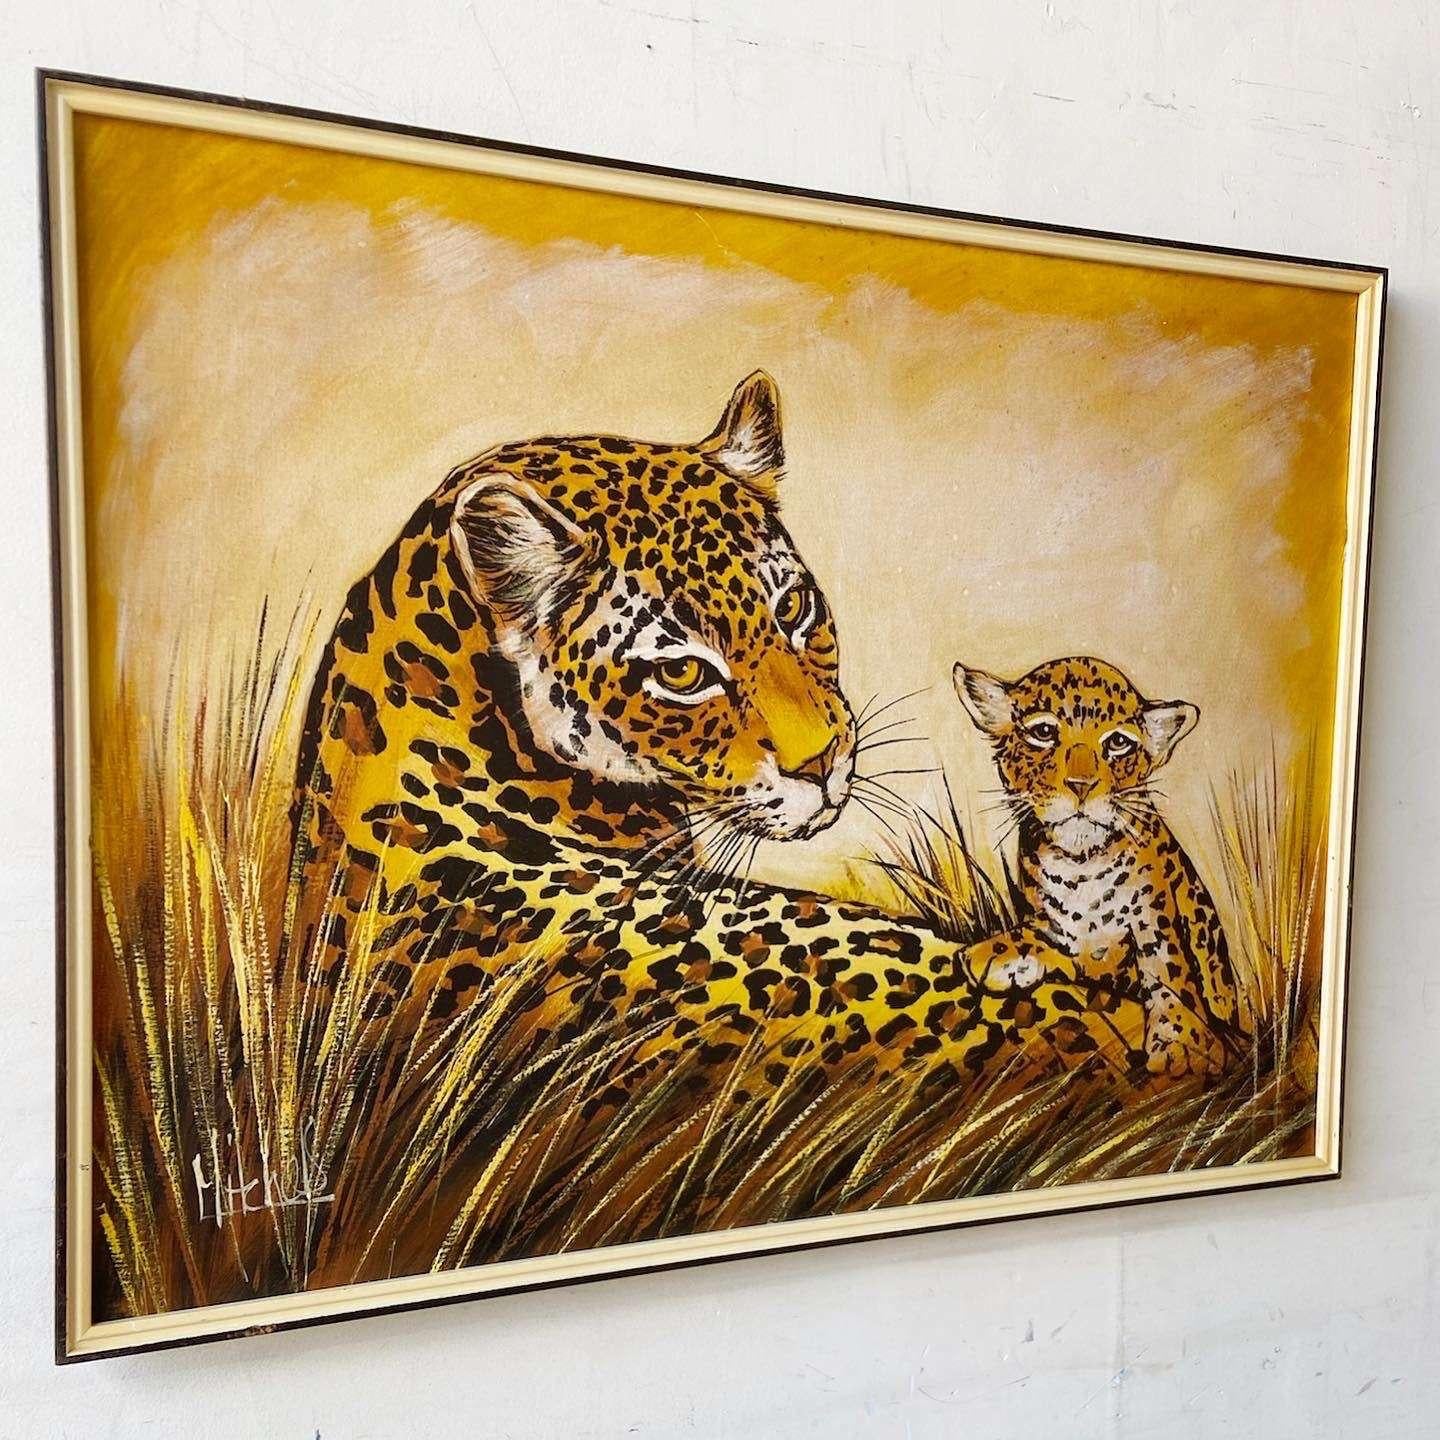 Exceptional large framed and signed oil painting on canvas. Subject is a mother a child cheetah sitting in the grasses.